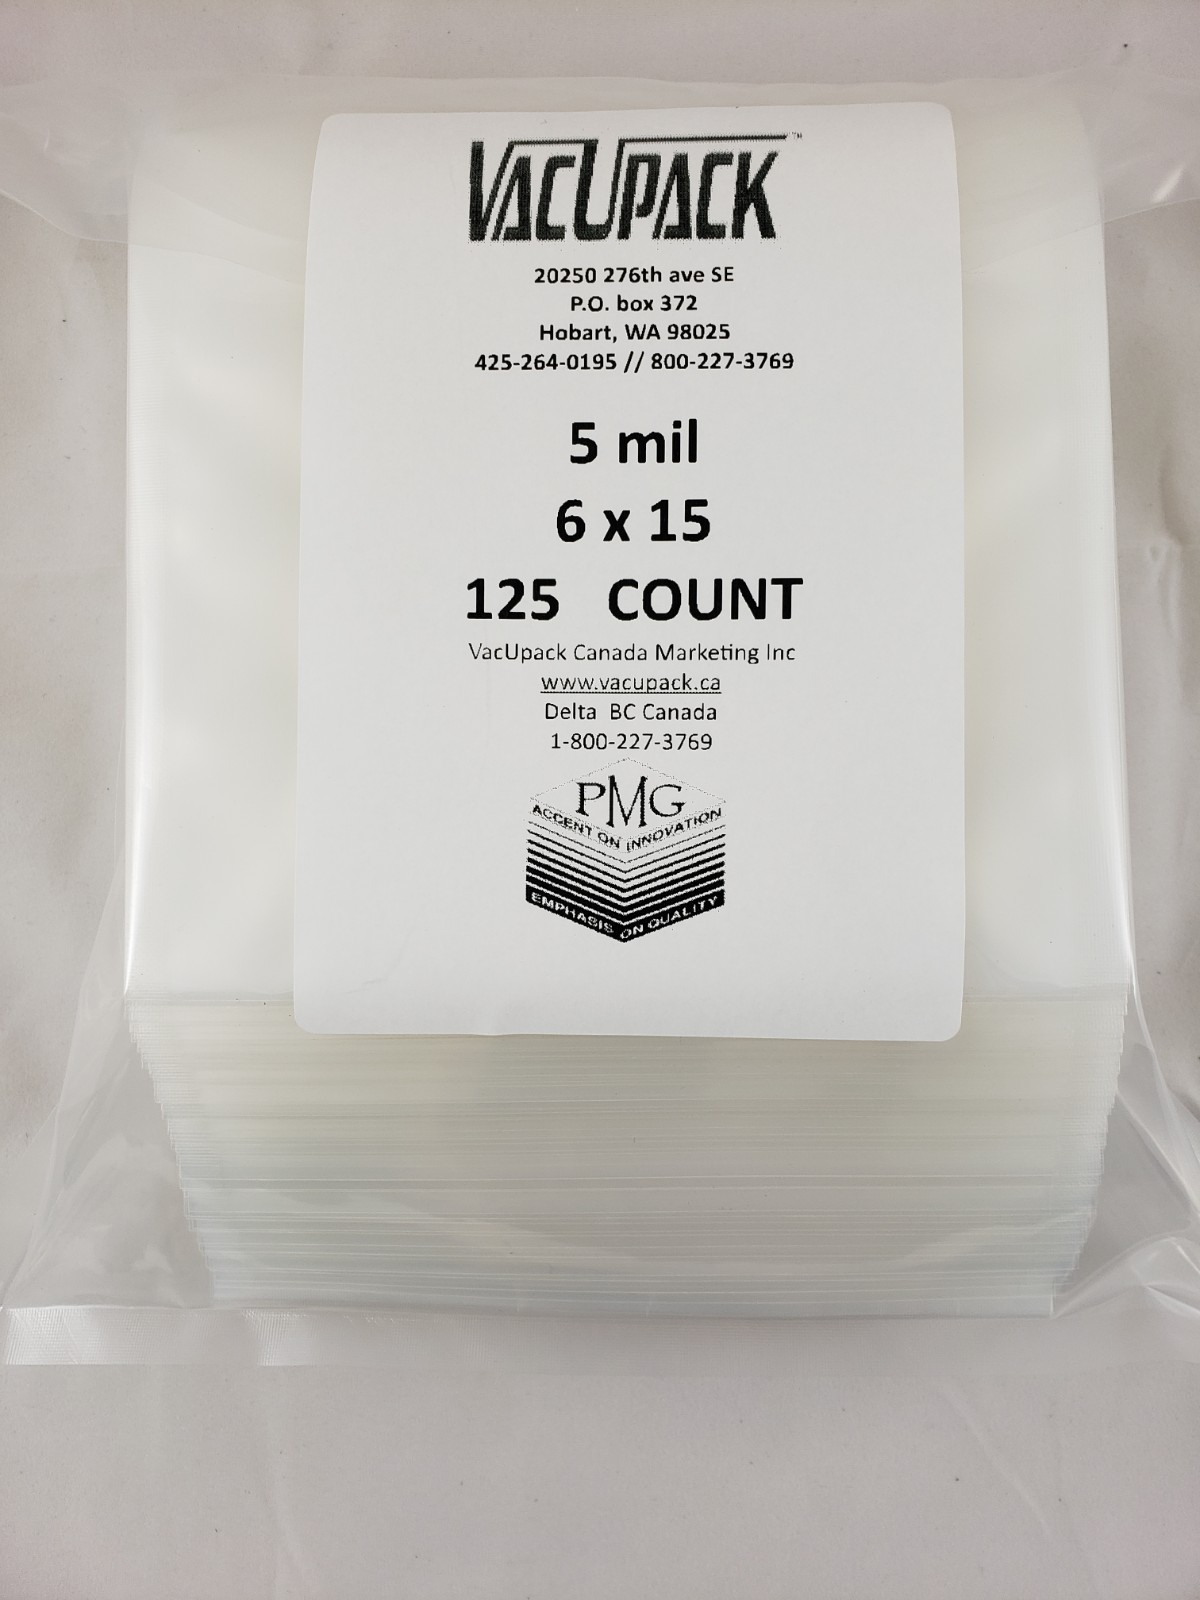 6 x 10 FlairPak 500 Chamber Vacuum Seal Pouches (5 Mil) - Case of 1000